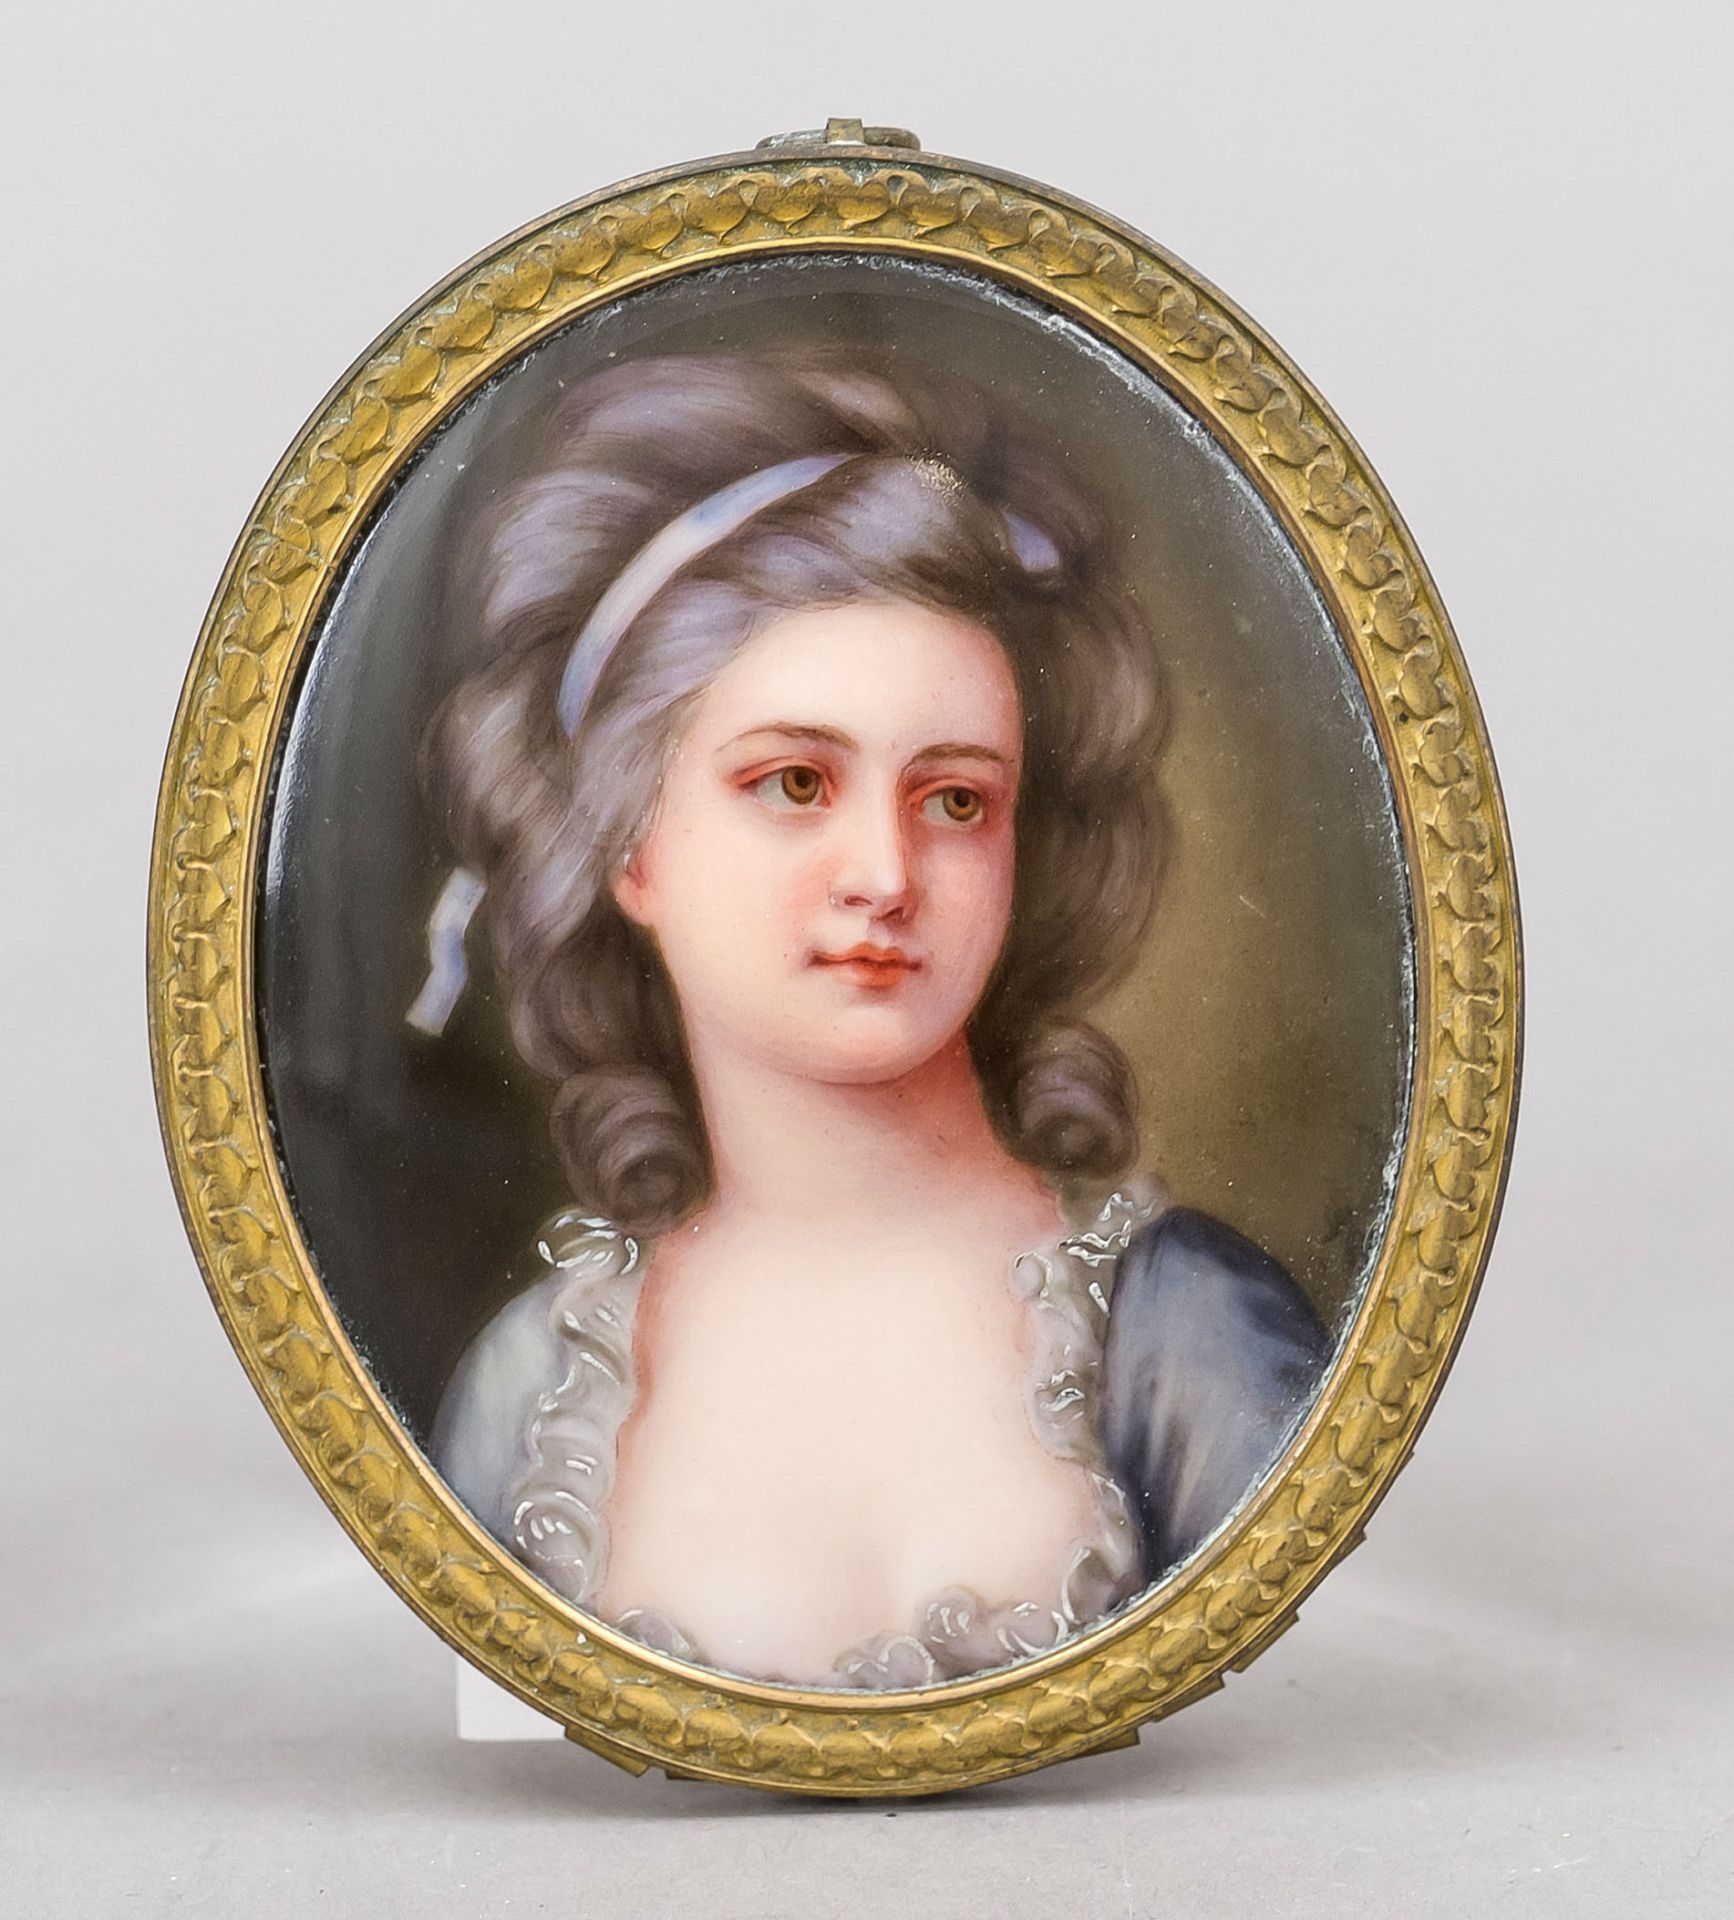 Miniature, probably 20th century, polychrome painting on porcelain, oval portrait of Countess